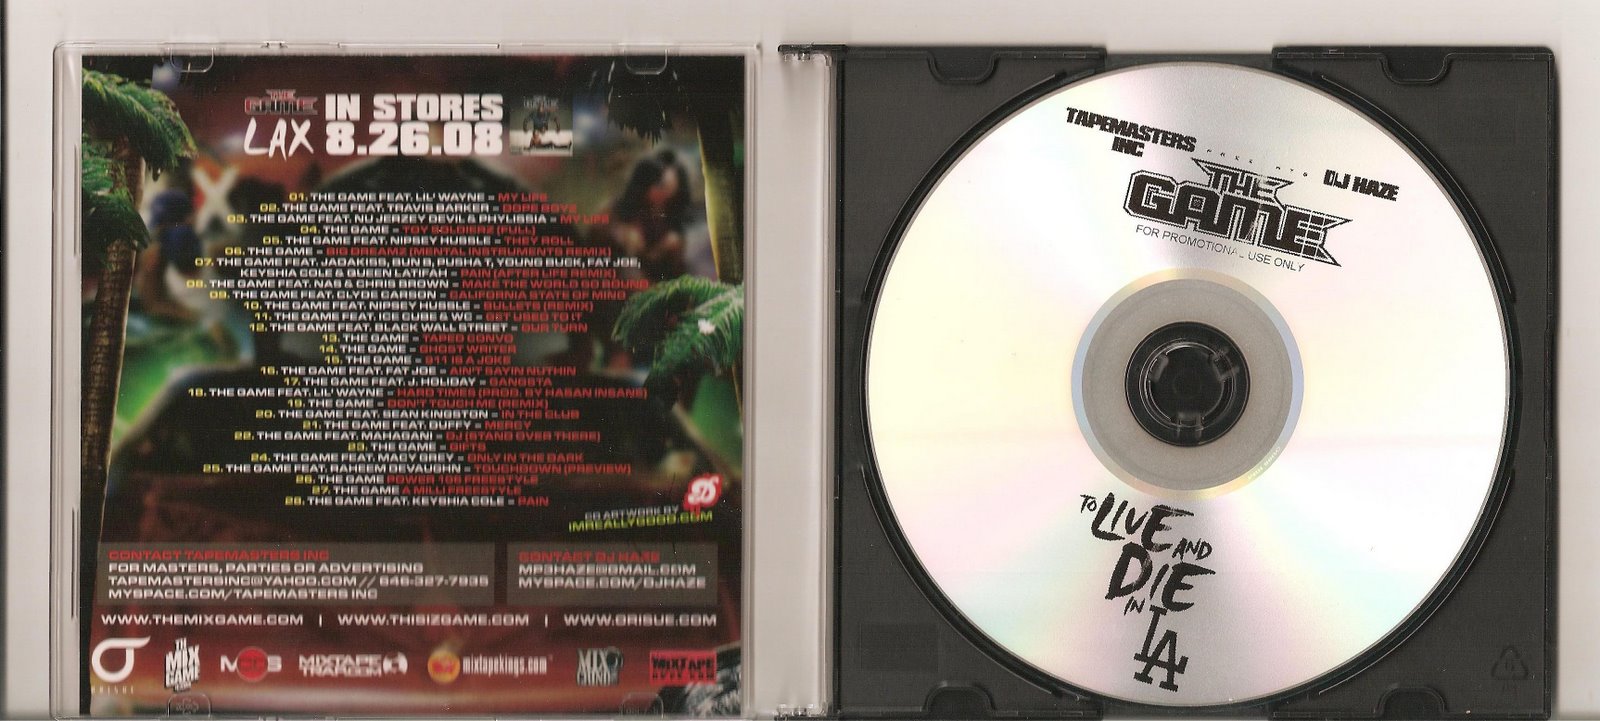 [00-tapemasters_inc._and_dj_haze_presents_the_game-to_live_and_die_in_la-(bootleg)-2008-(scan).jpg]